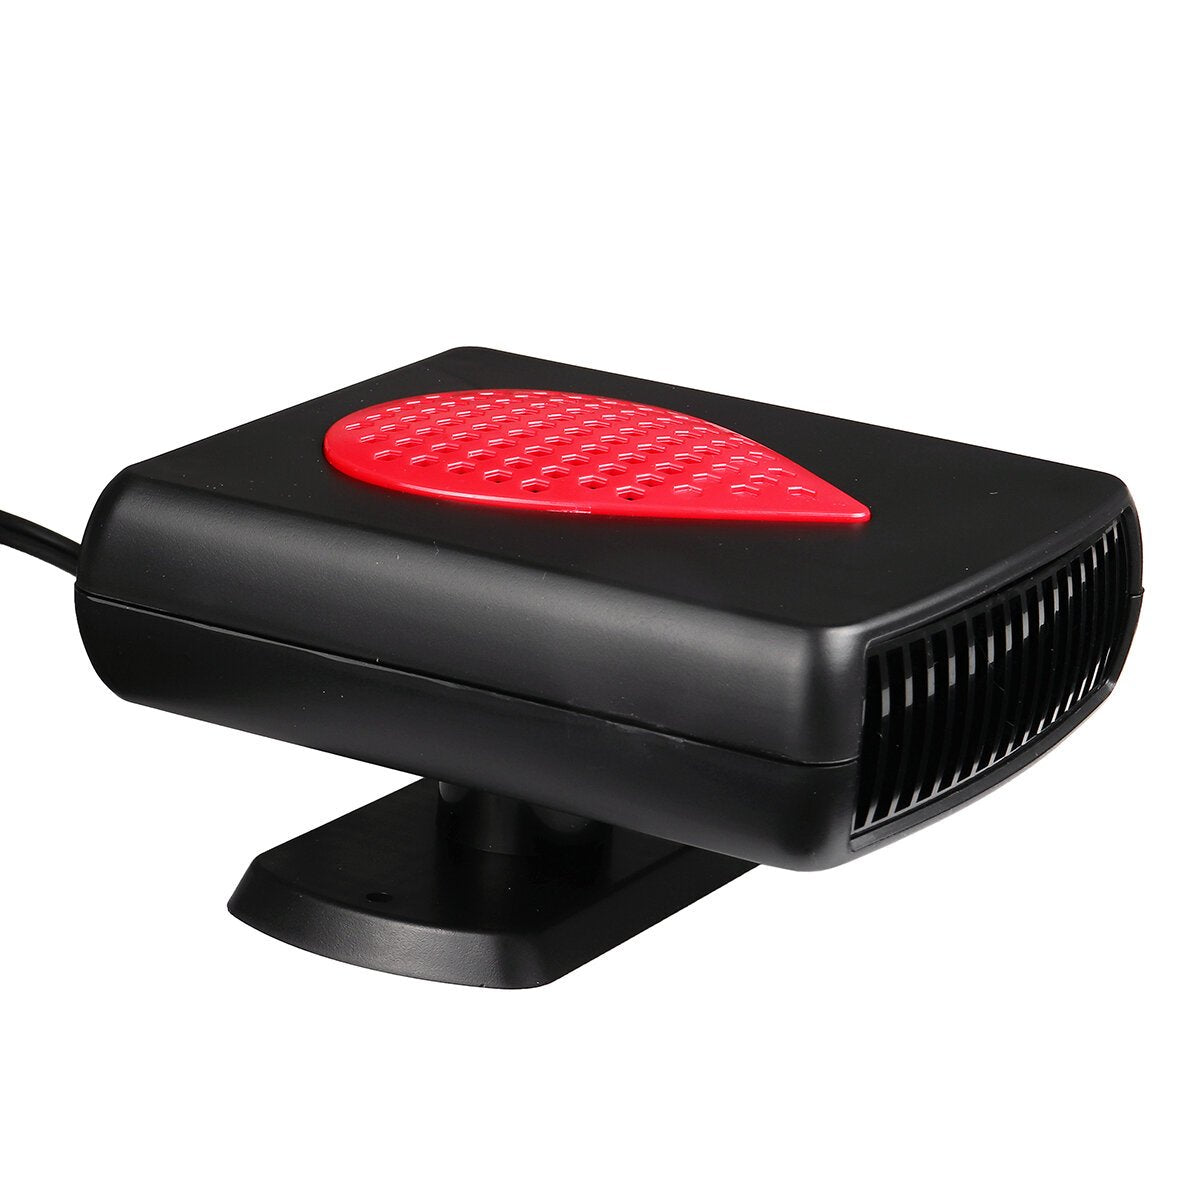 150W Car Heater Heating Cooling Fan Defroster Demister Purify 2 Speeds 360 Rotation Low Noise